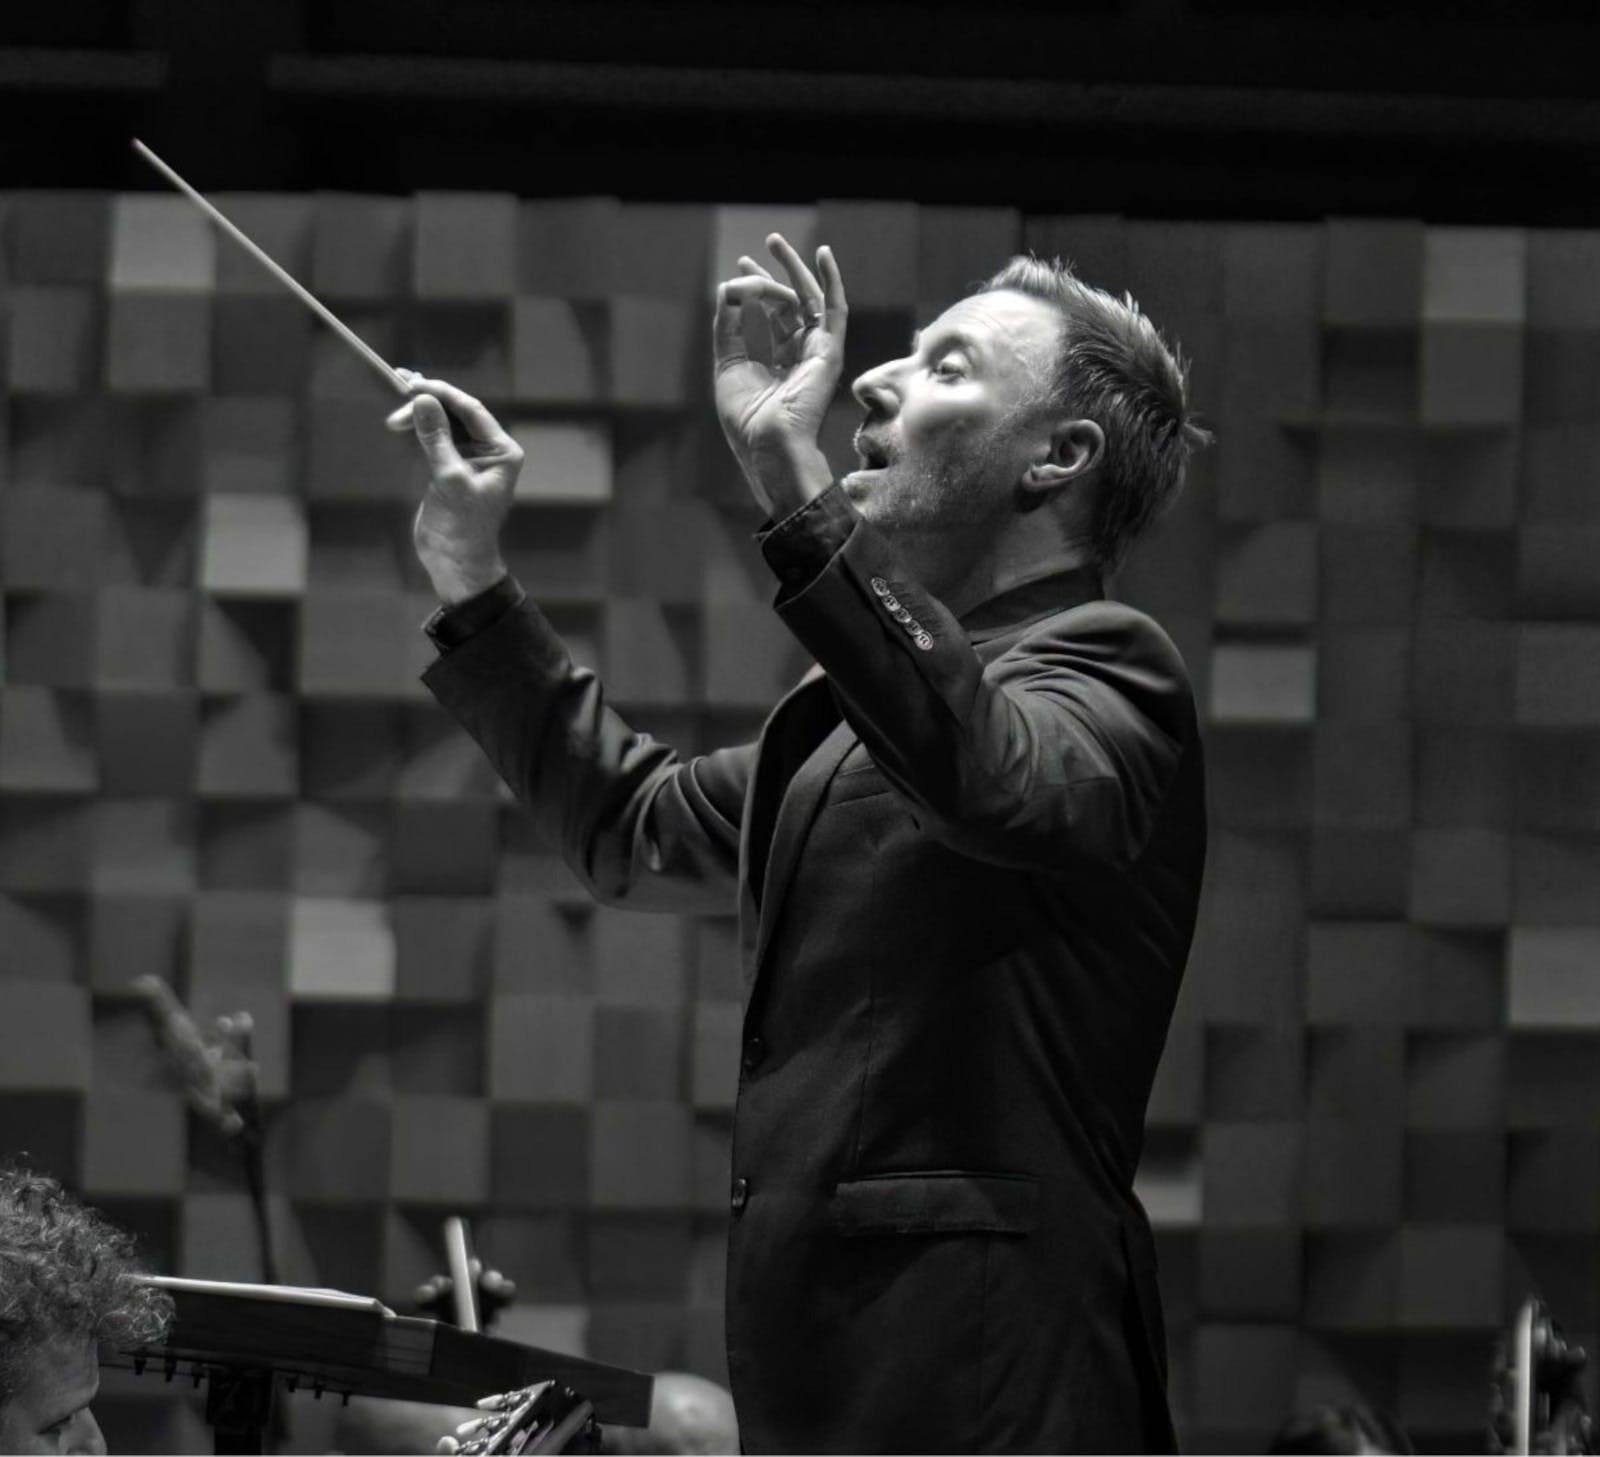 Monochrome image of a conductor, holding a baton, with his hands in the air.